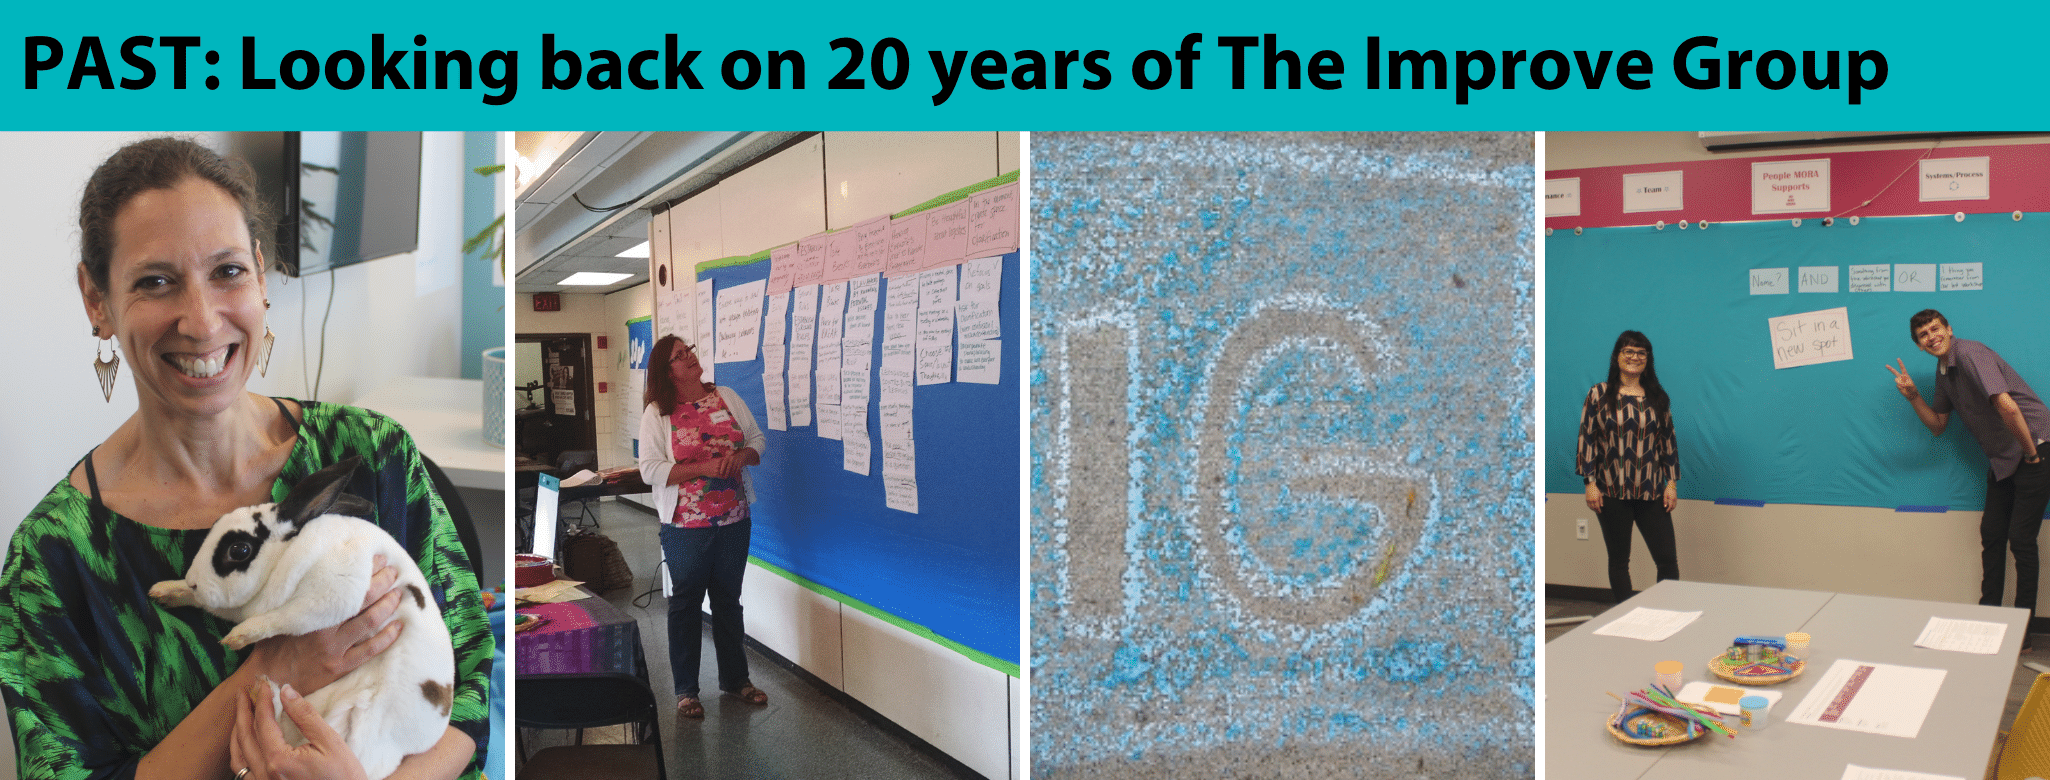 Image of our team members from over the years and a graphic of text that says "PAST: Looking back on 20 years of The Improve Group"